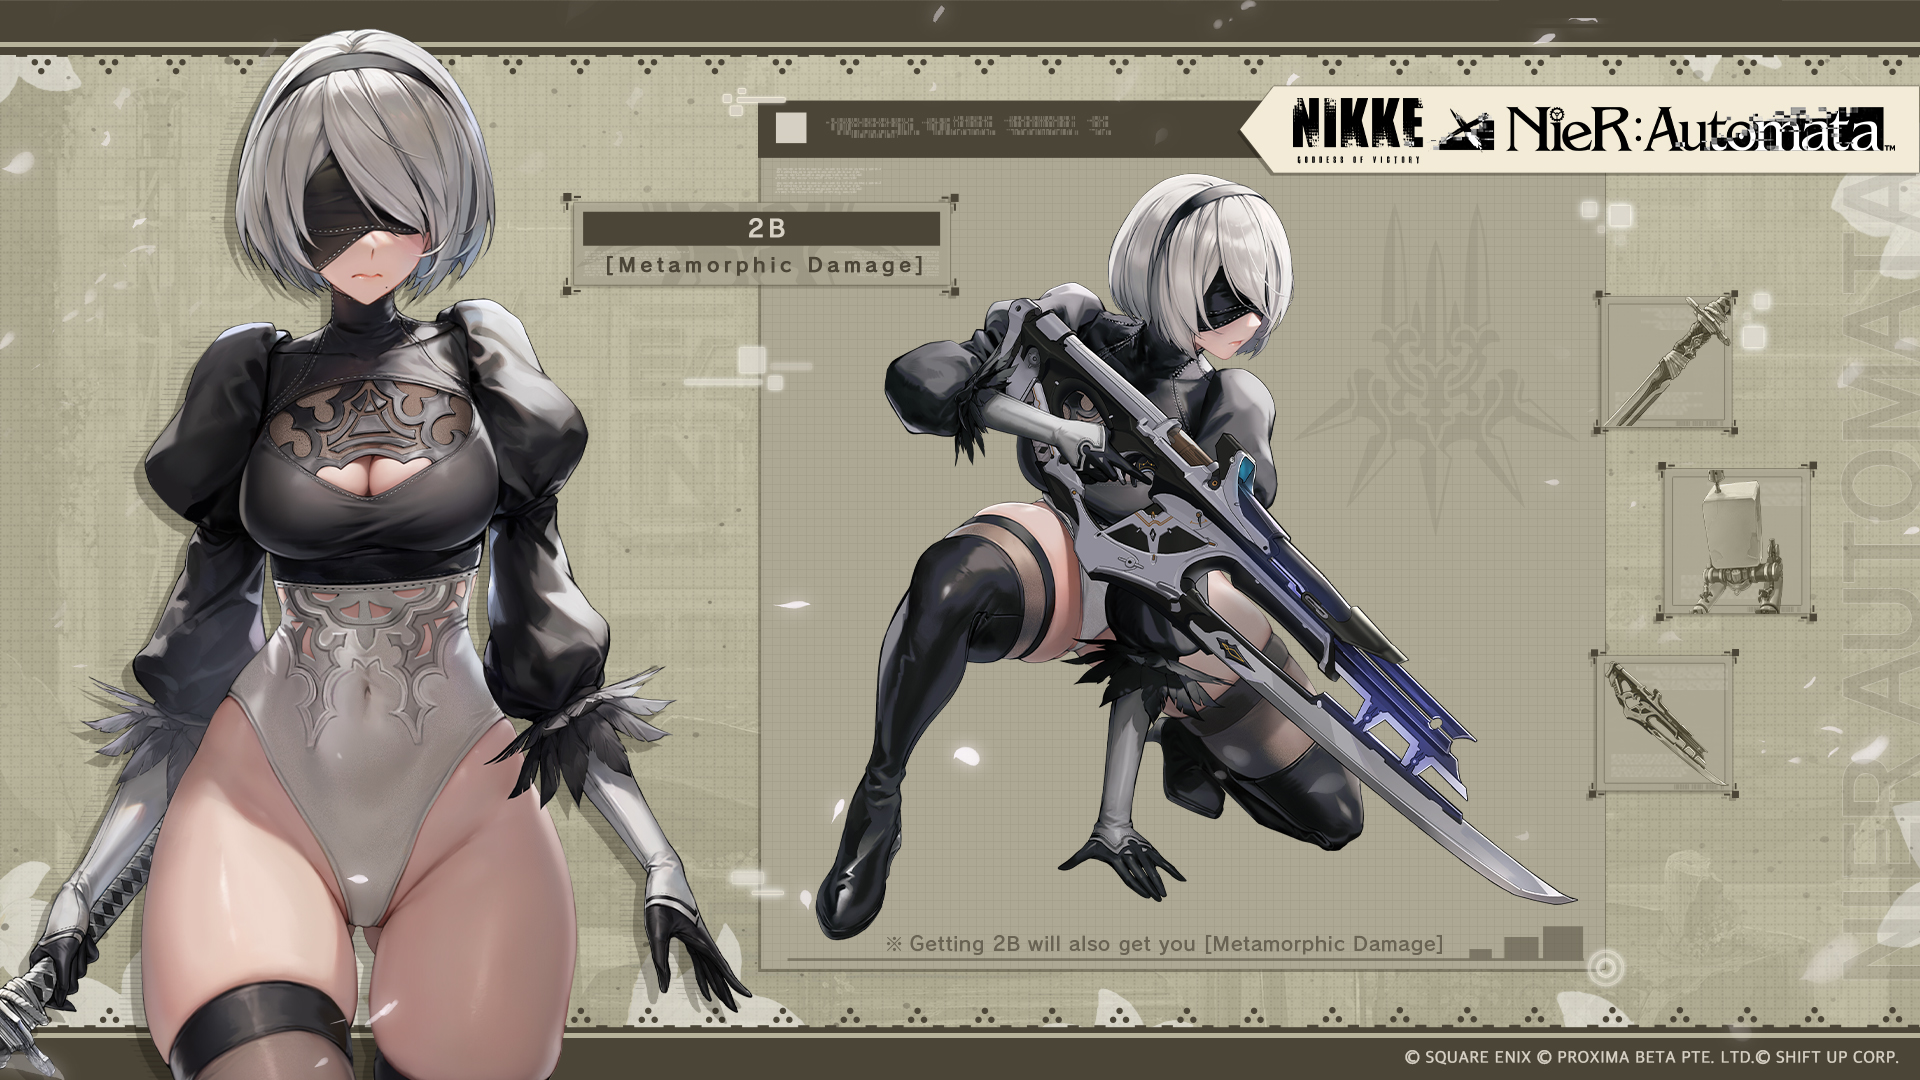 Goddess of Victory 2B costumes: A breakdown of the abilities for Nier Automata's 2B in anime game Goddess of Victory Nikke